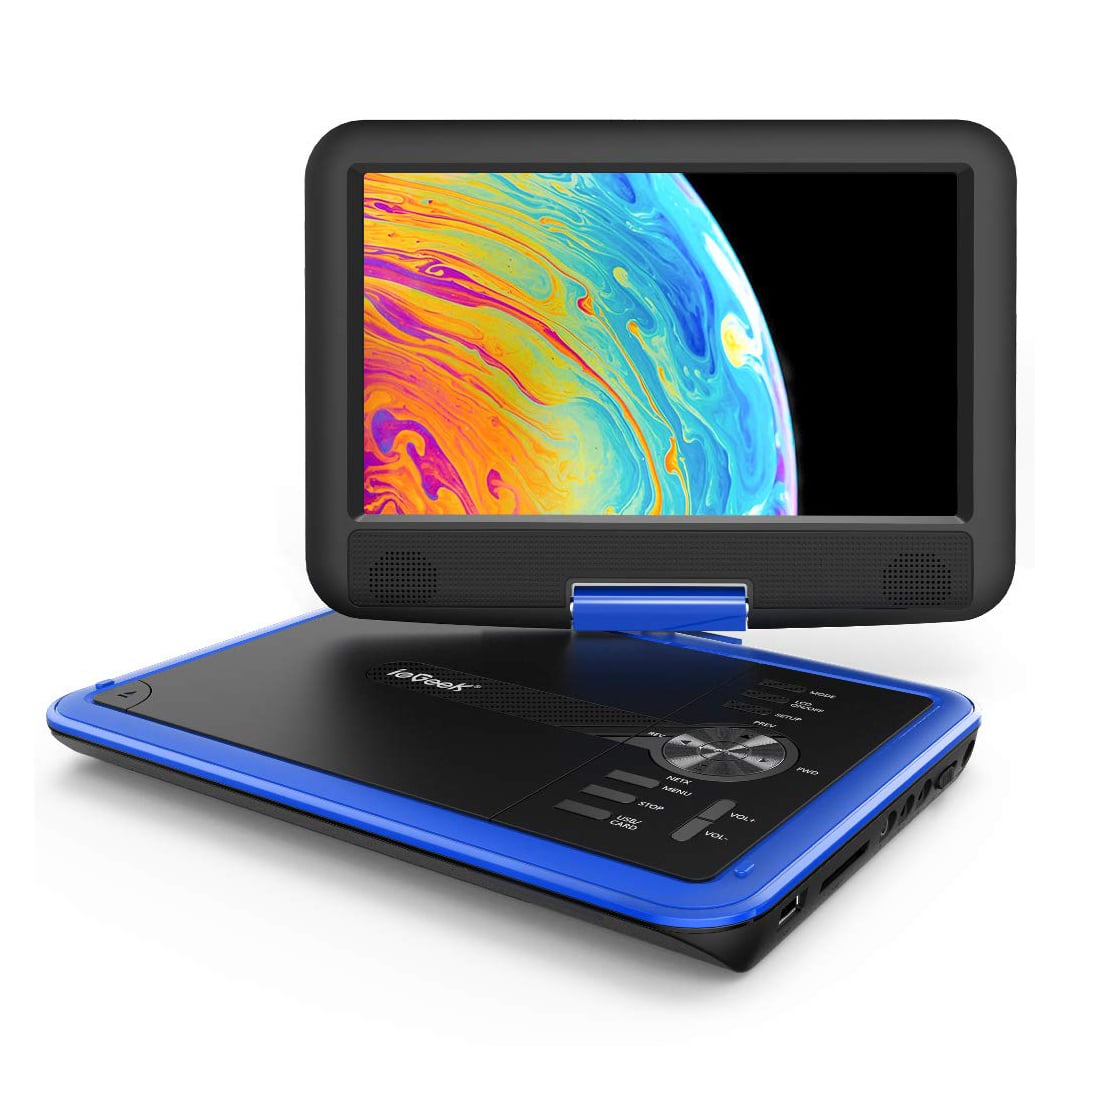 Top 10 Best Portable DVD Players in 2022 Reviews Buyer's Guide